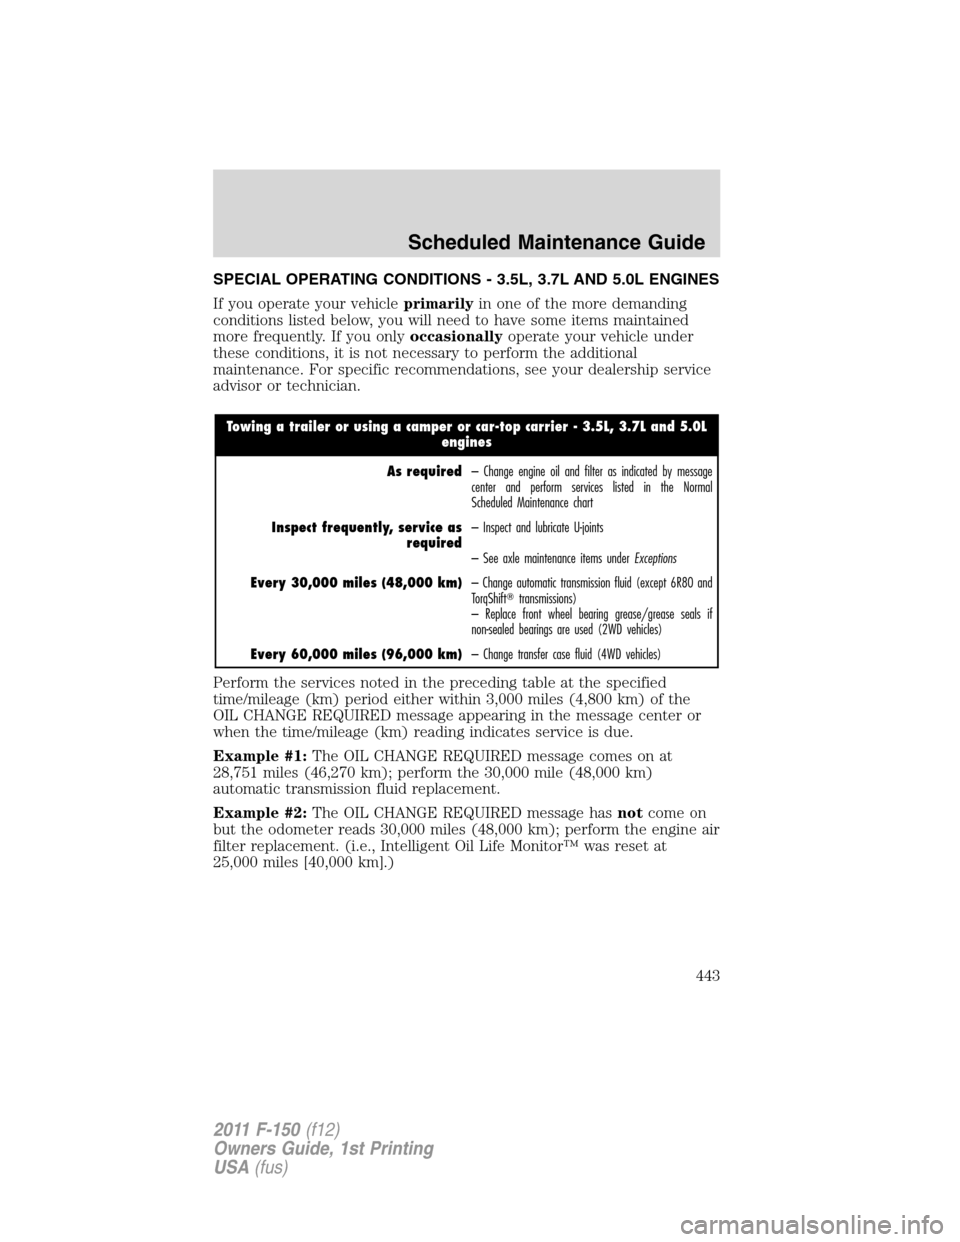 FORD F150 2011 12.G User Guide SPECIAL OPERATING CONDITIONS - 3.5L, 3.7L AND 5.0L ENGINES
If you operate your vehicleprimarilyin one of the more demanding
conditions listed below, you will need to have some items maintained
more fr